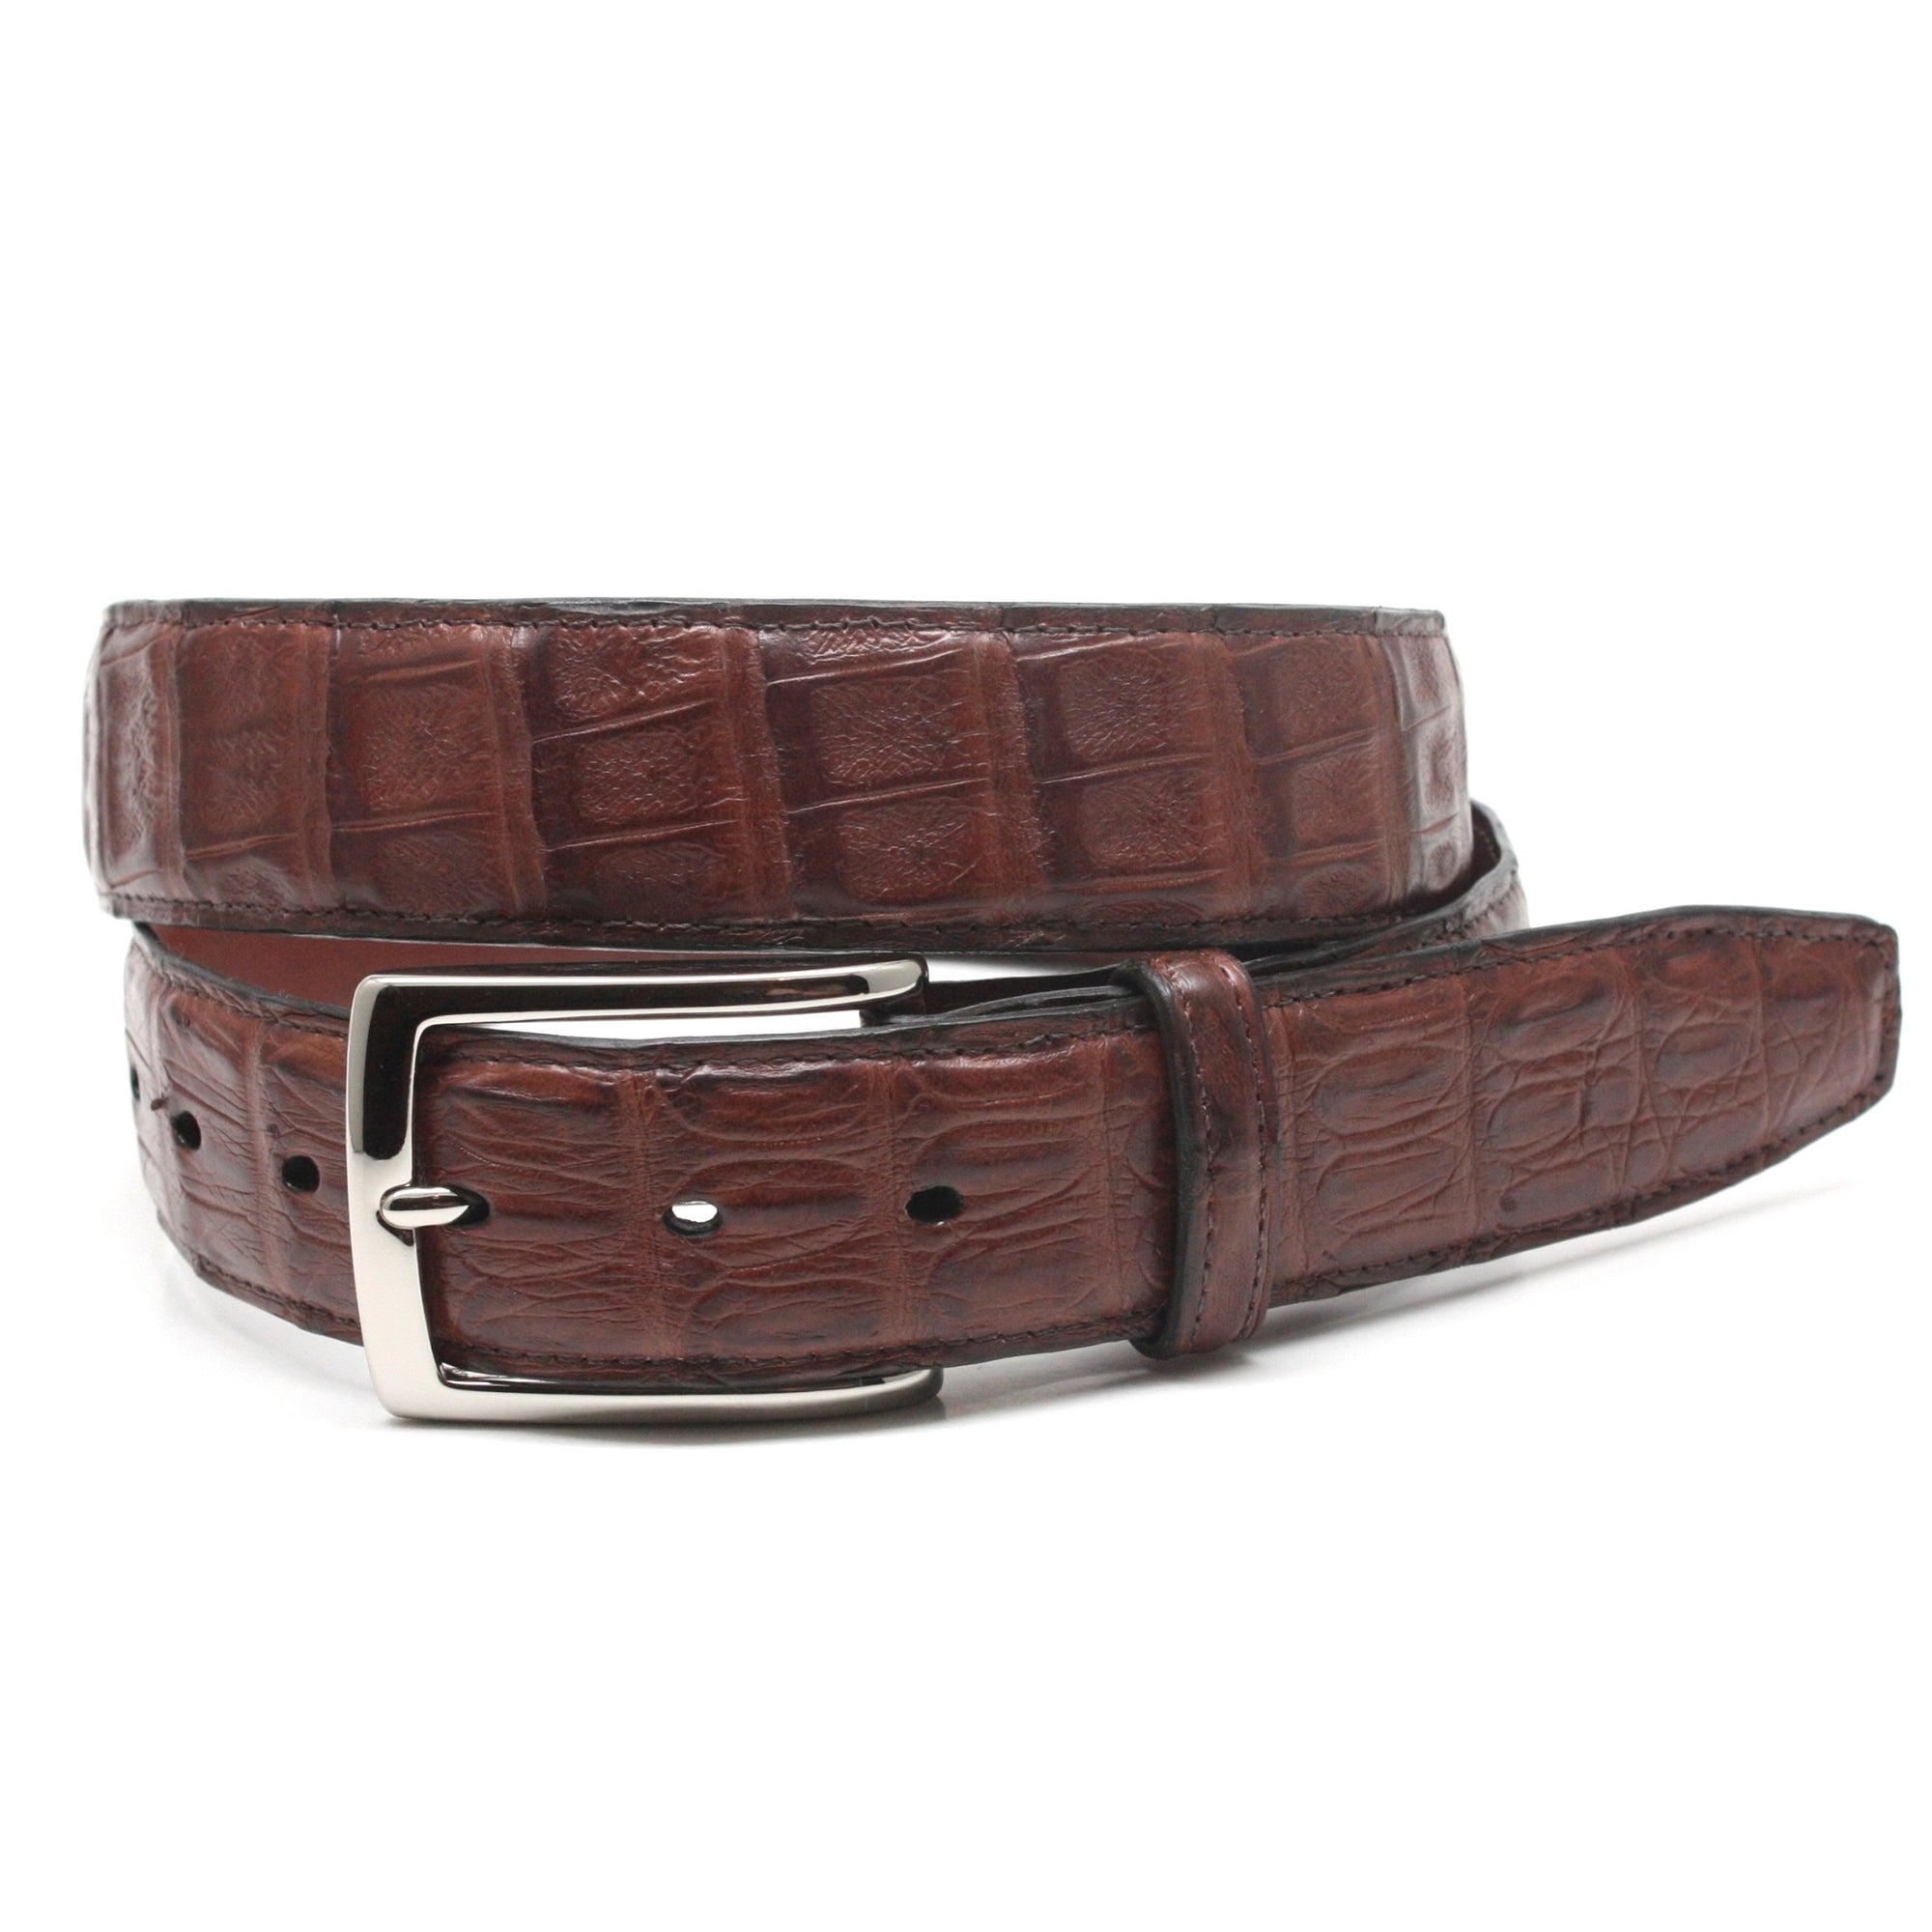 South American Caiman Belt in Cognac by Torino Leather